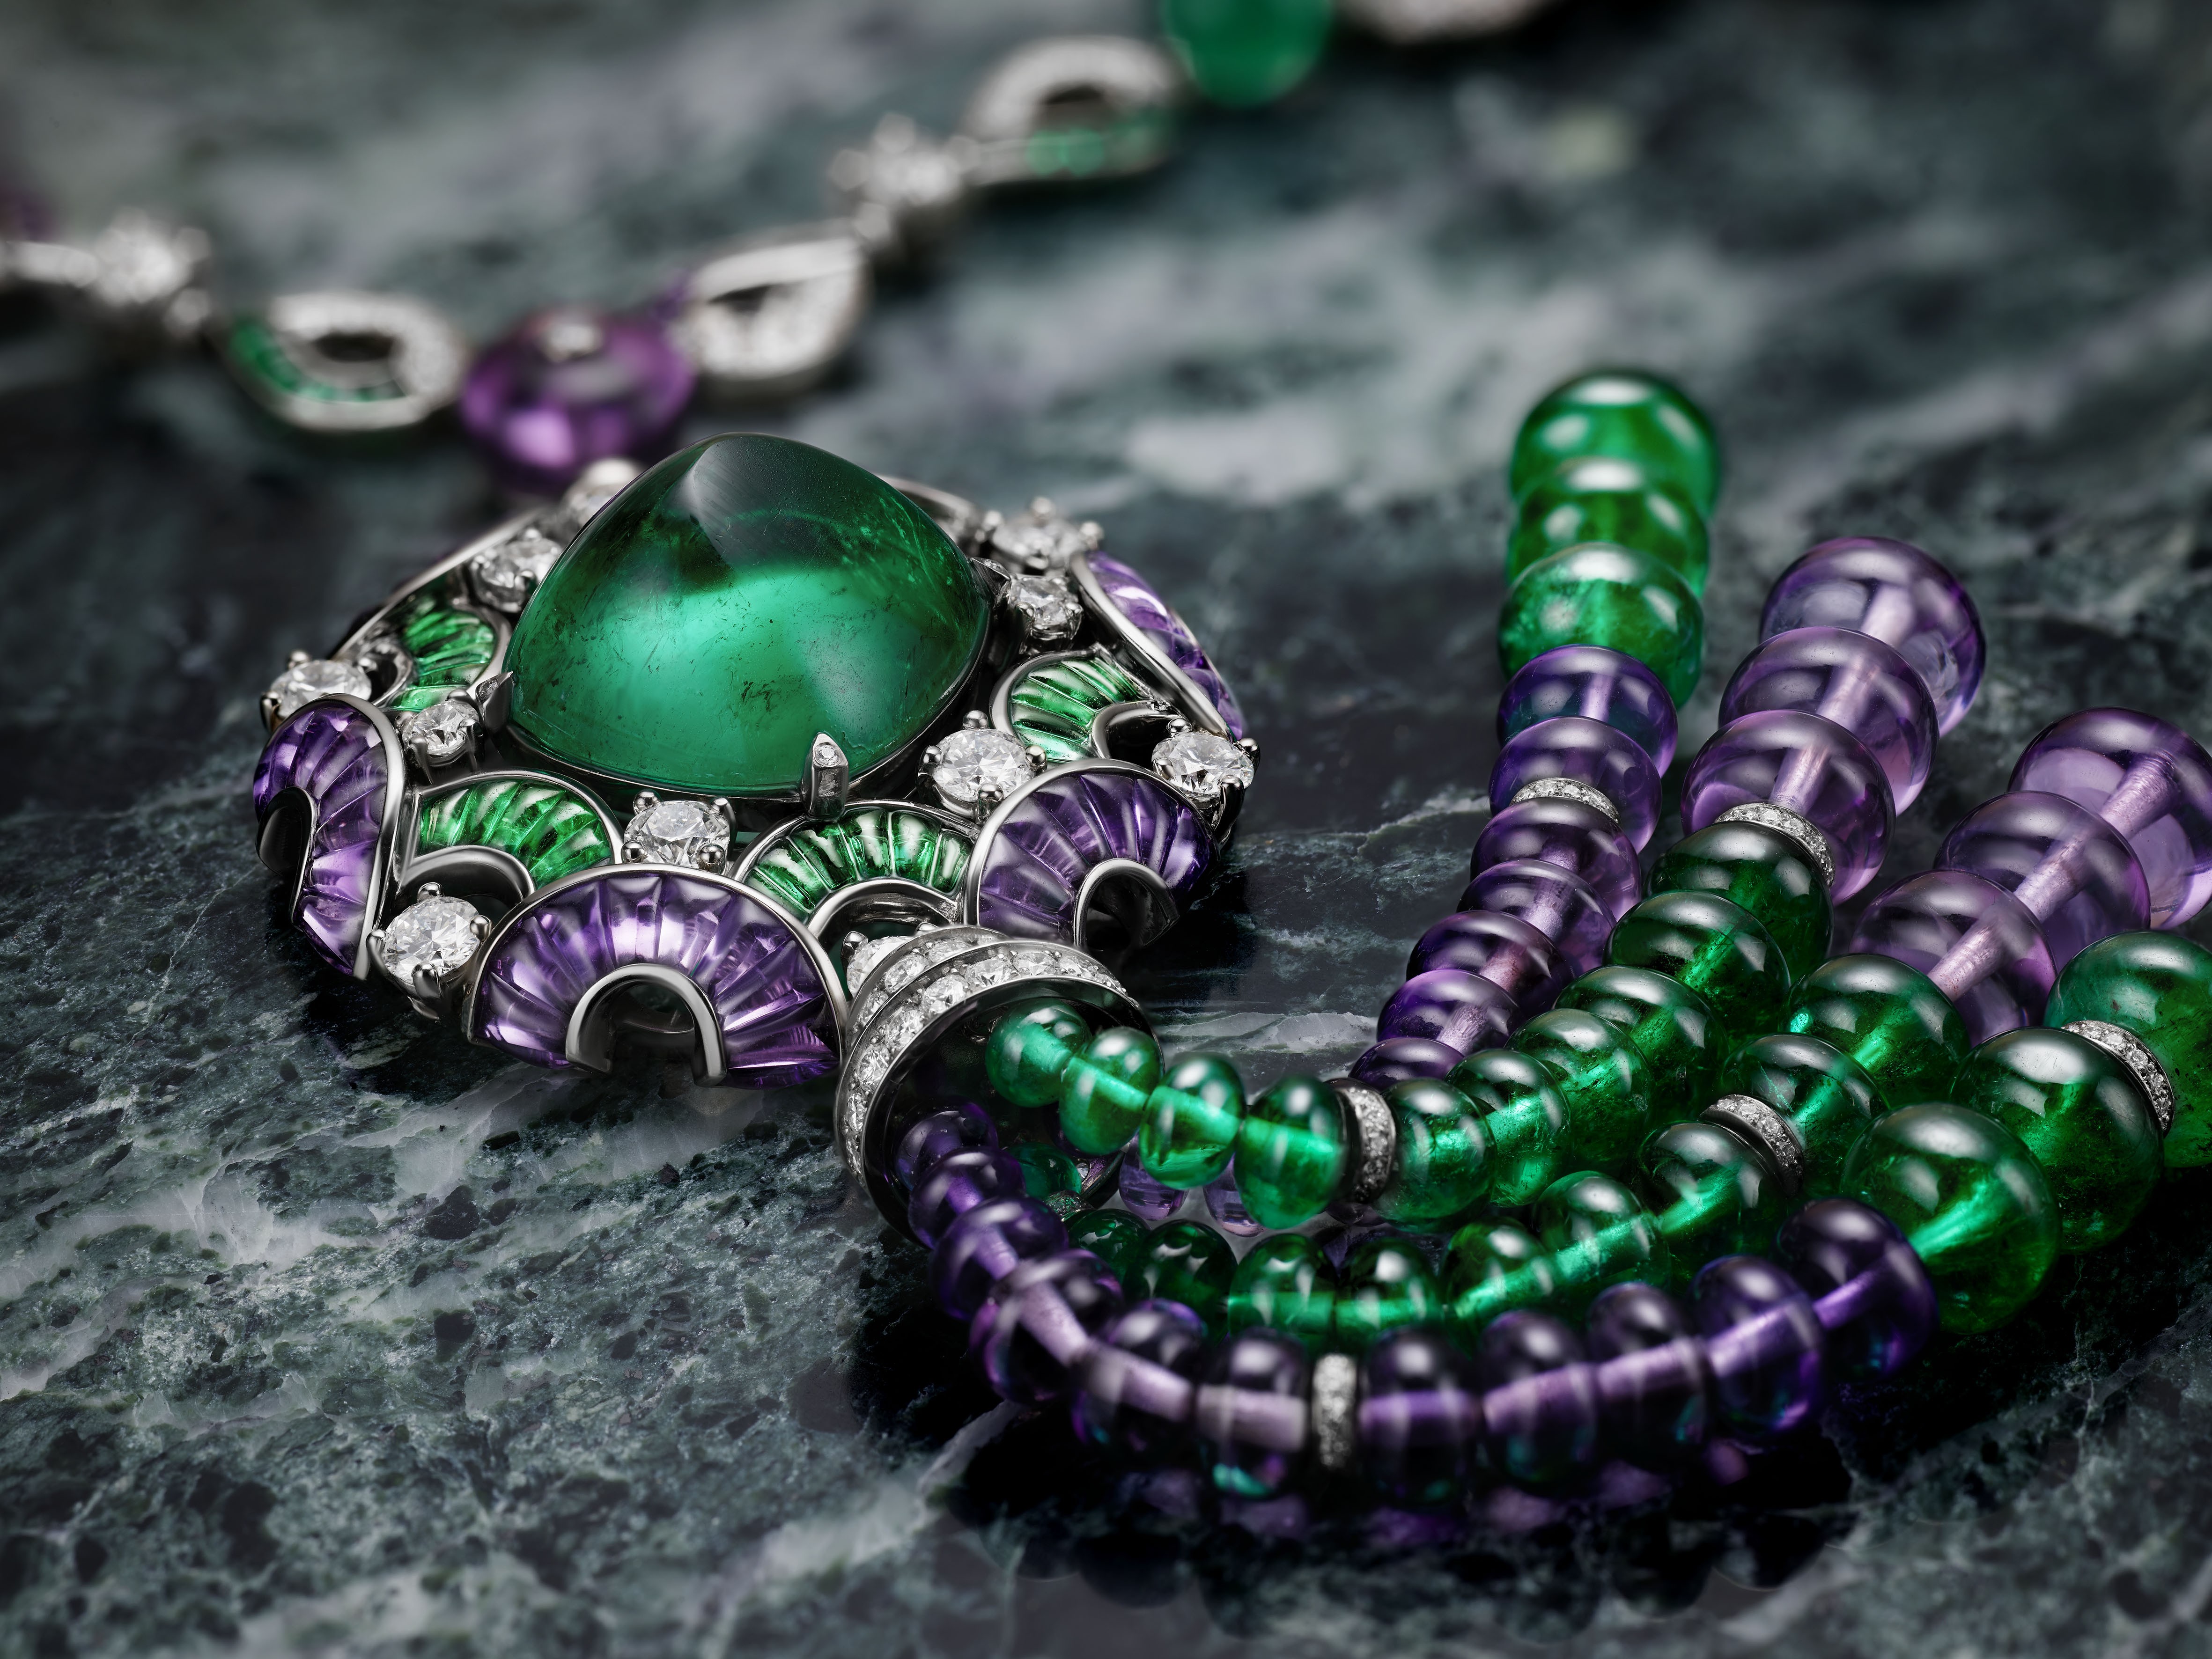 A Festa delle Principesse necklace is one of three themes from Bulgari's Festa high-jewellery collection. The piece includes a 22.6ct cabochon Colombian emerald, and 30 emerald and 33 purple quartz and amethyst beads.